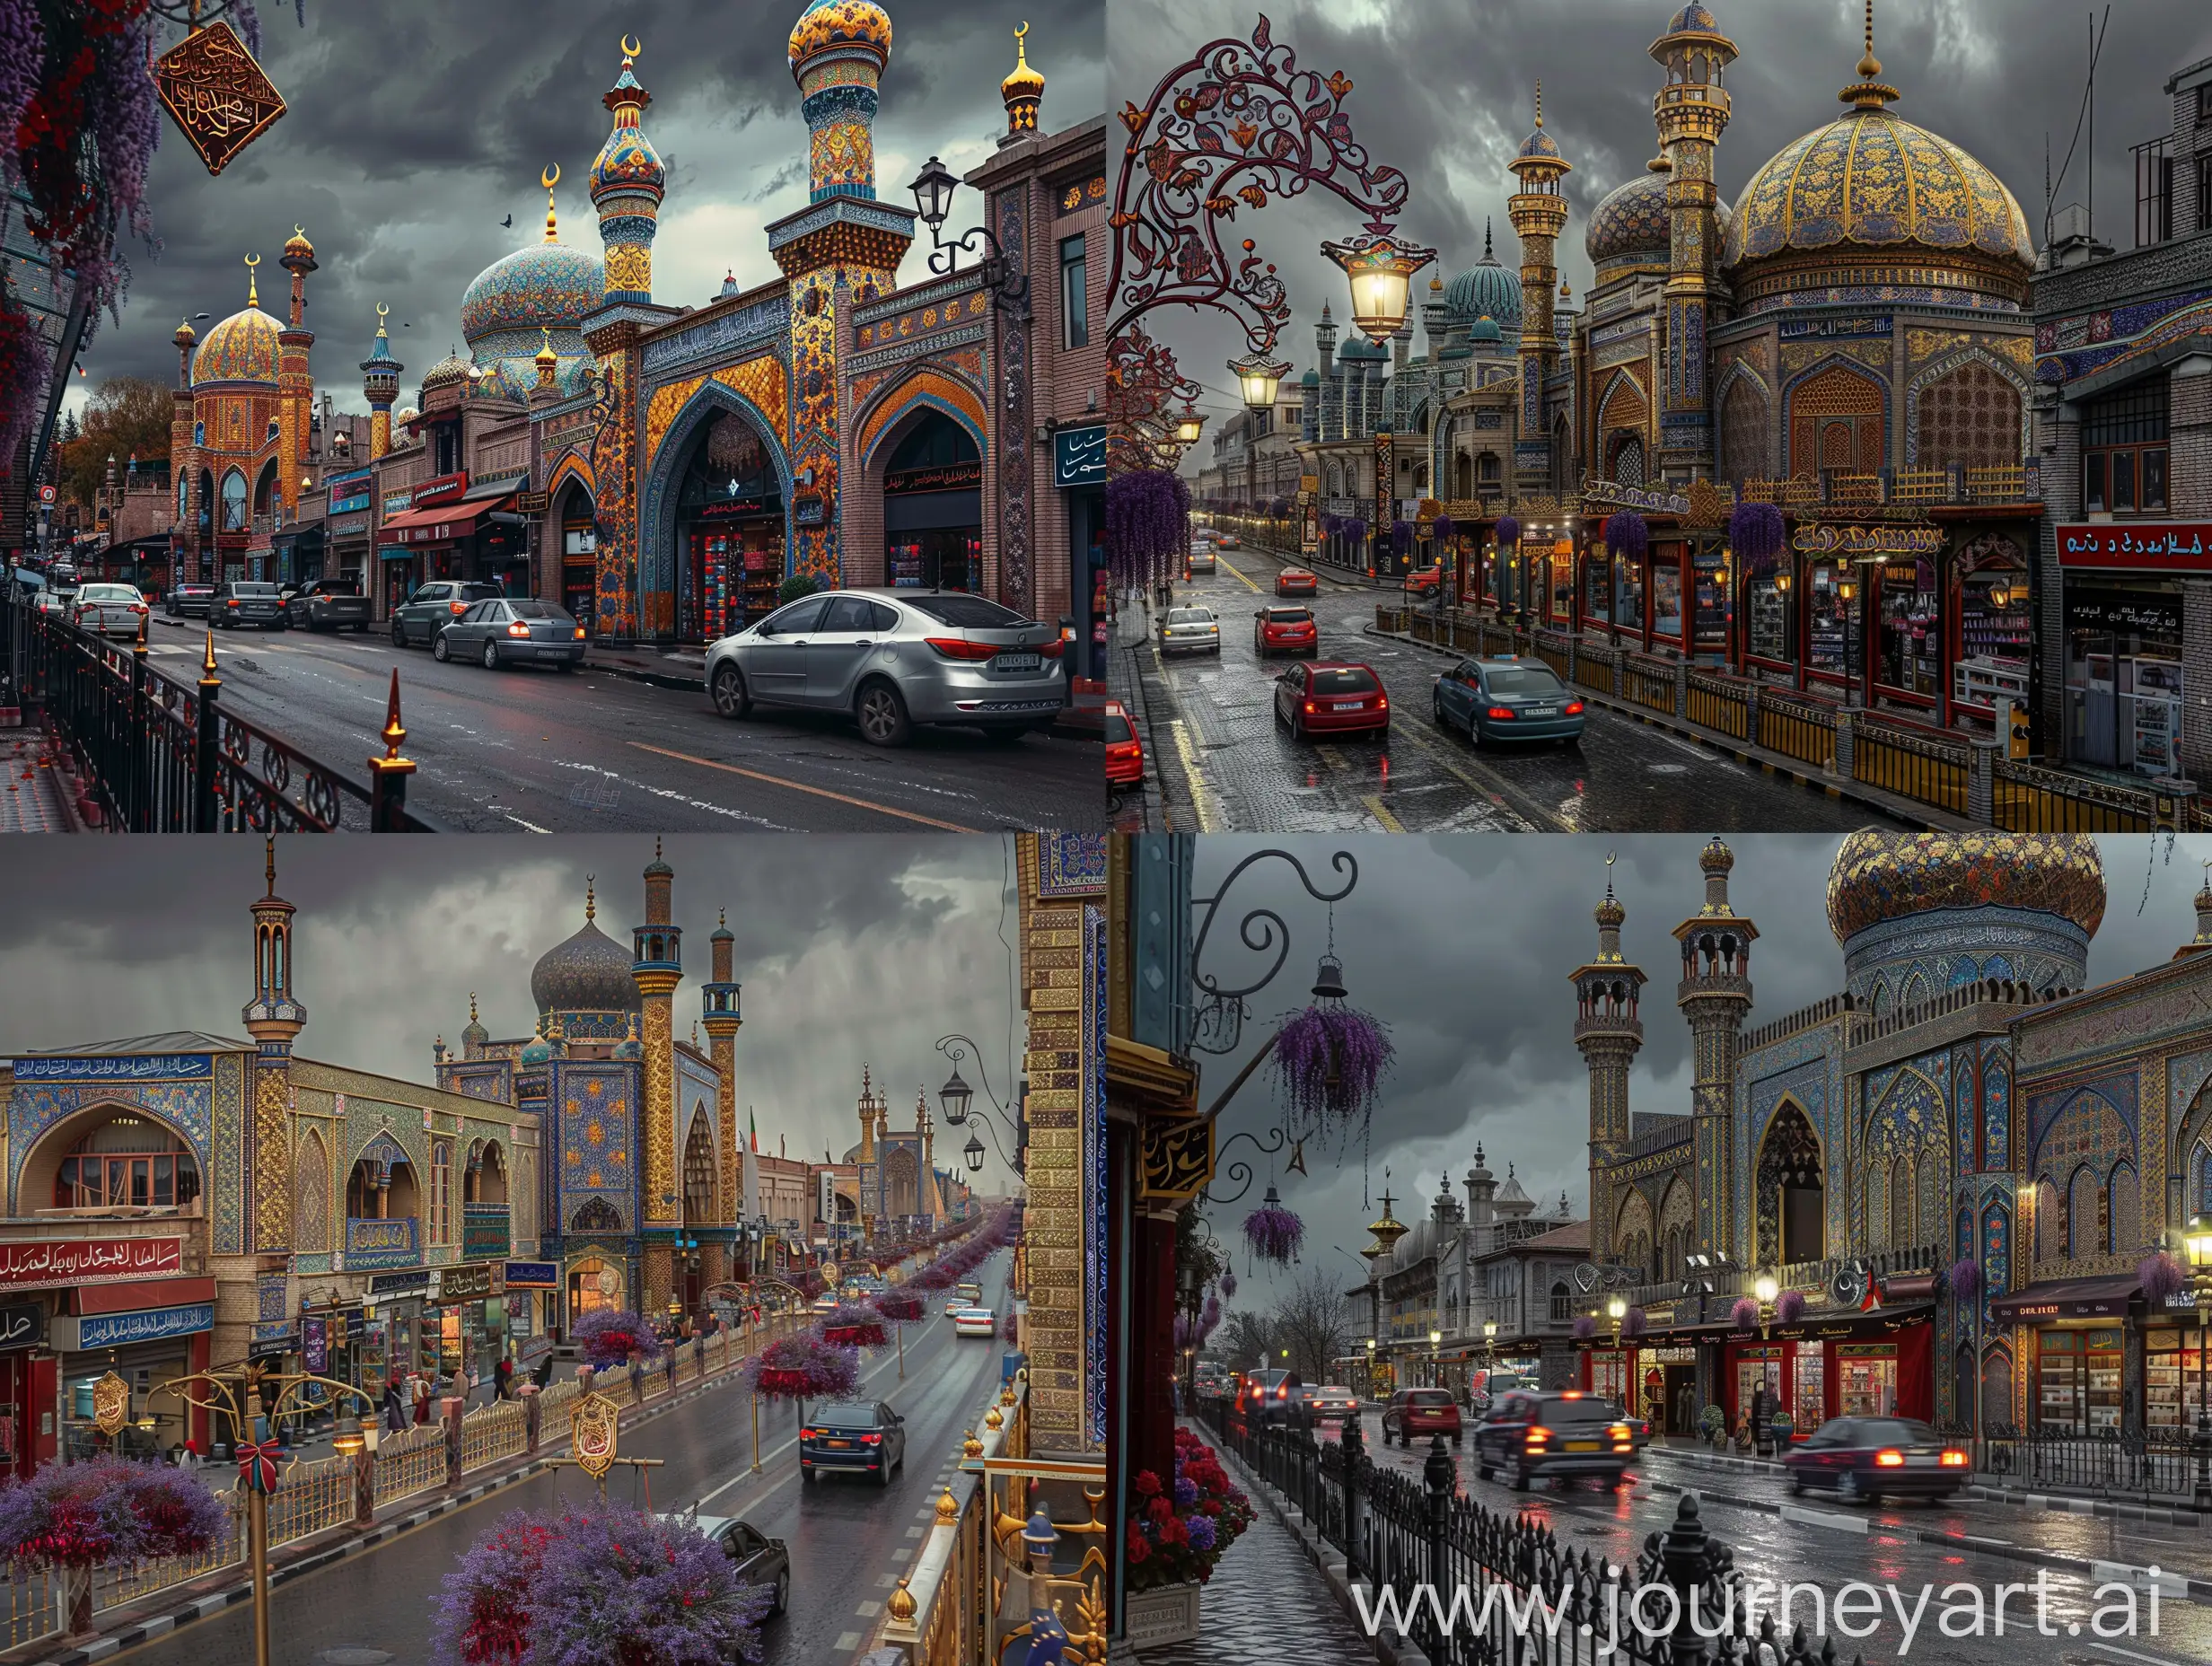 Photography, all buildings and mosques are Timurid marbled brick having golden red blue Persian design and tilework, traffic on a France like street having shops and stores at bottom of all buildings, islamic style fence on sidewalk, islamic ornamented lamp lights, ornate direction signboards, lavender red hanging flowers, dark grey sky, Paris influences --q 1 --style raw 